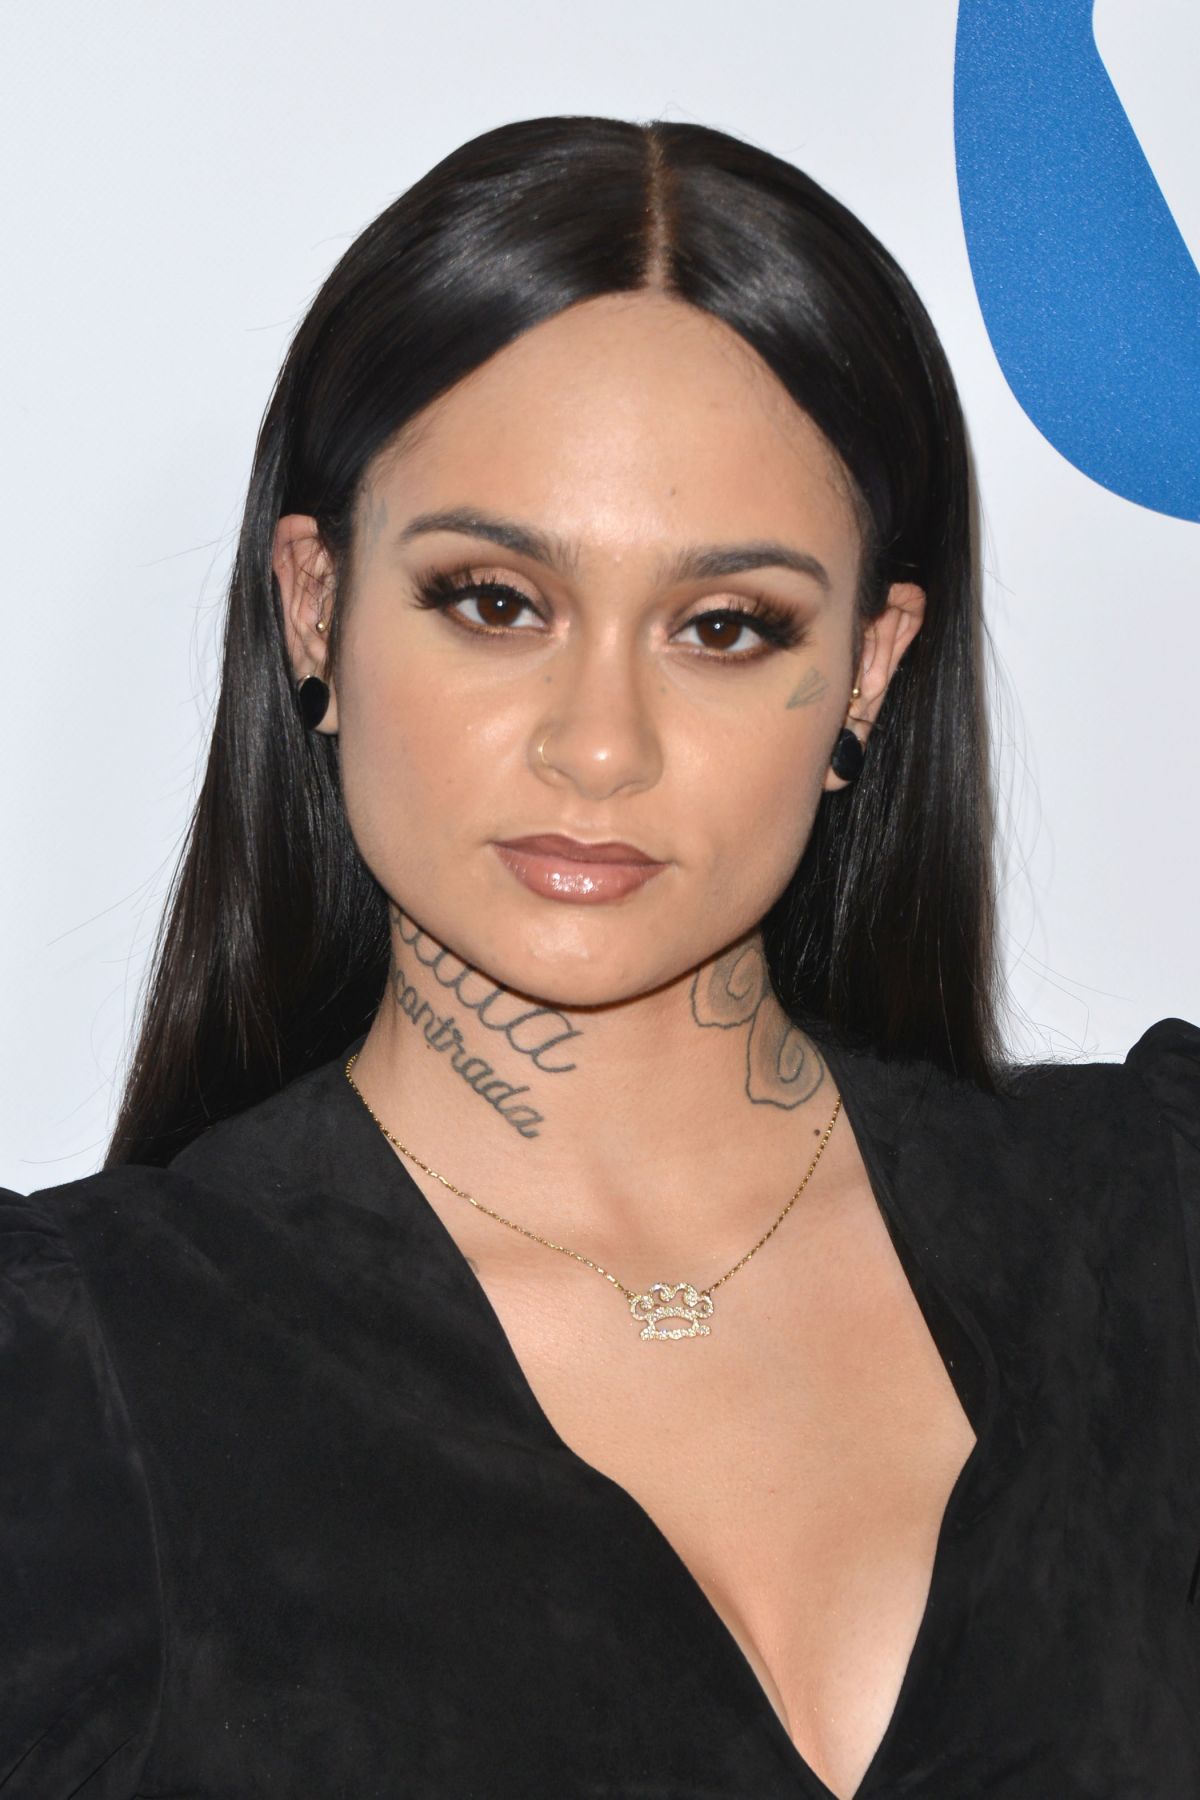 kehlani-at-warner-music-group-grammy-after-party-in-los-angeles-02-12-2017_3.jpg